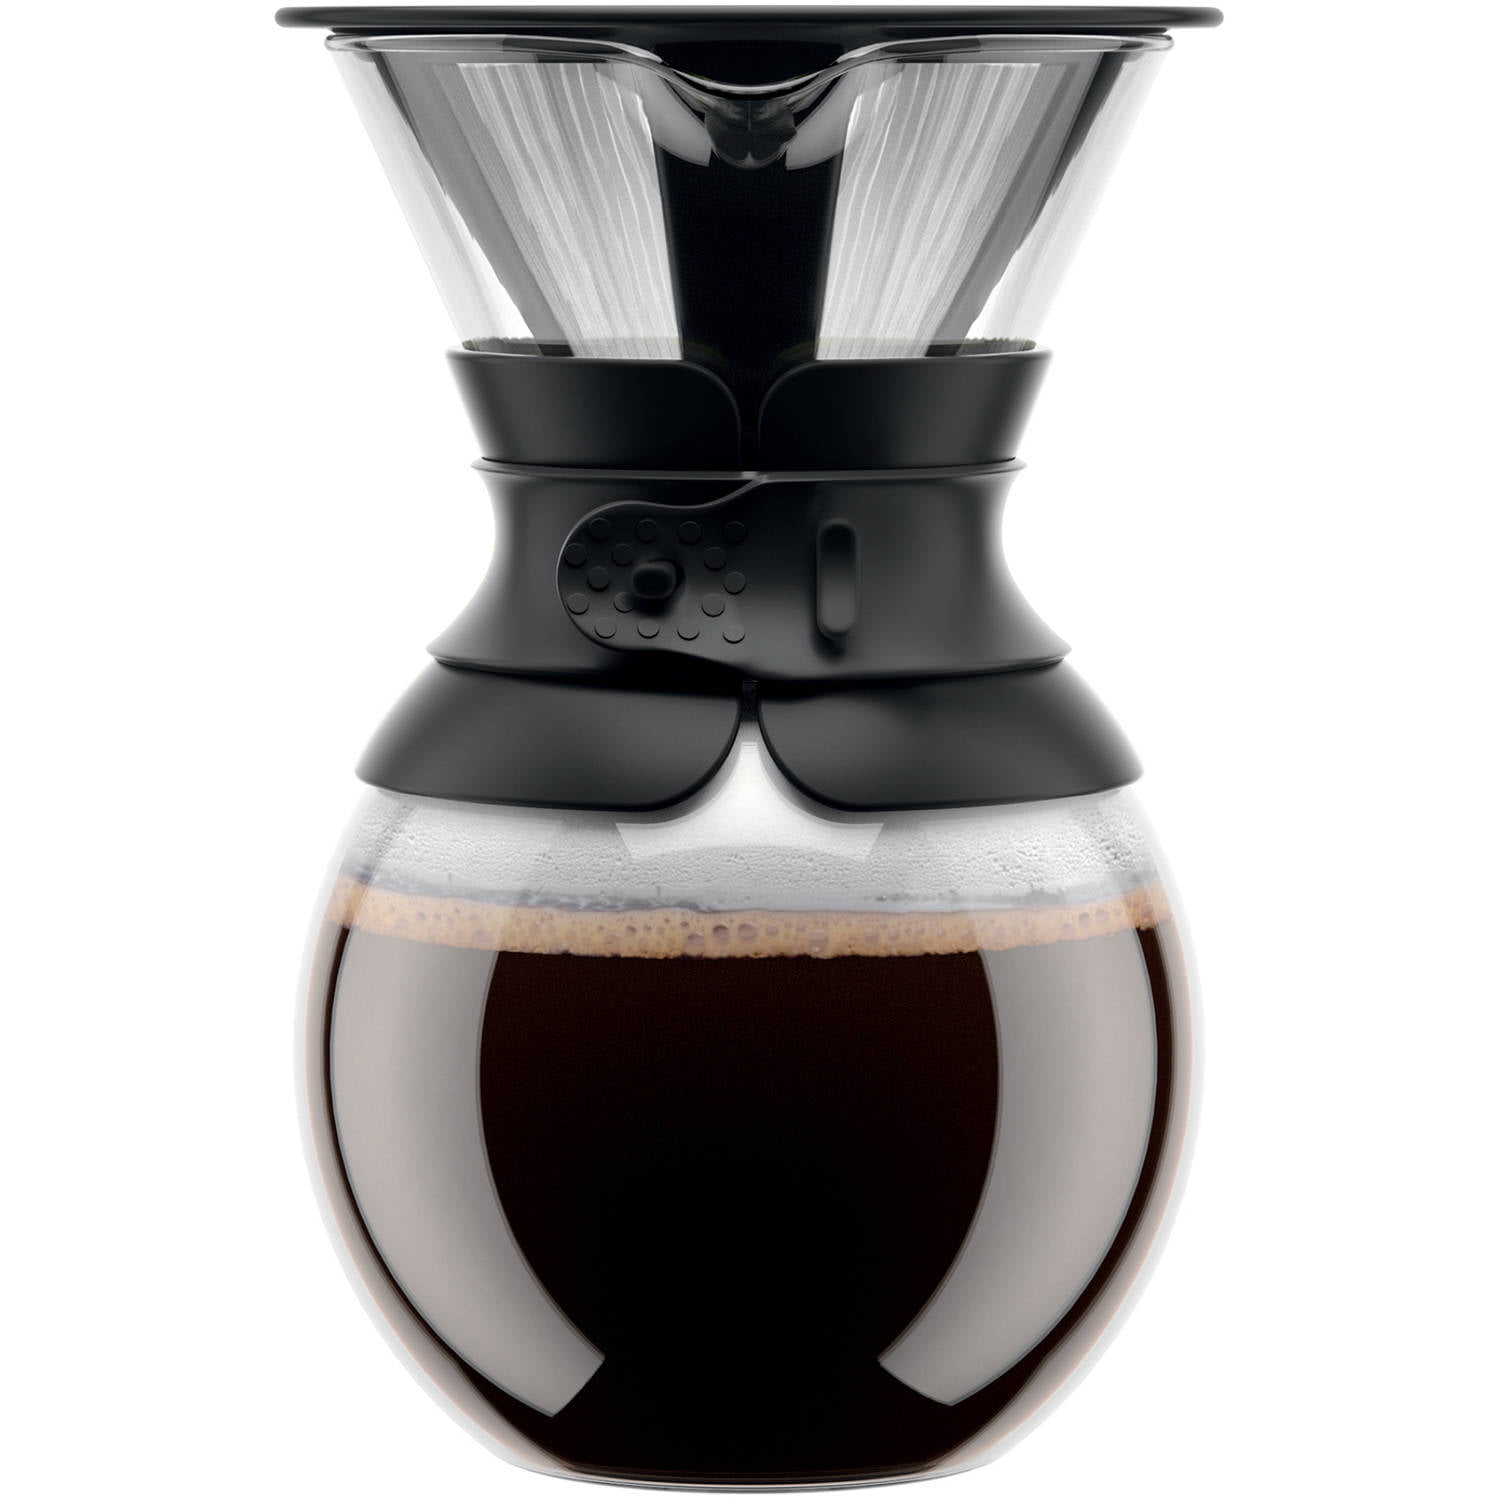 34-Oz Bodum 8-Cup Pour Over Double Wall Cork Grip Coffee Maker $19.21 at Walmart